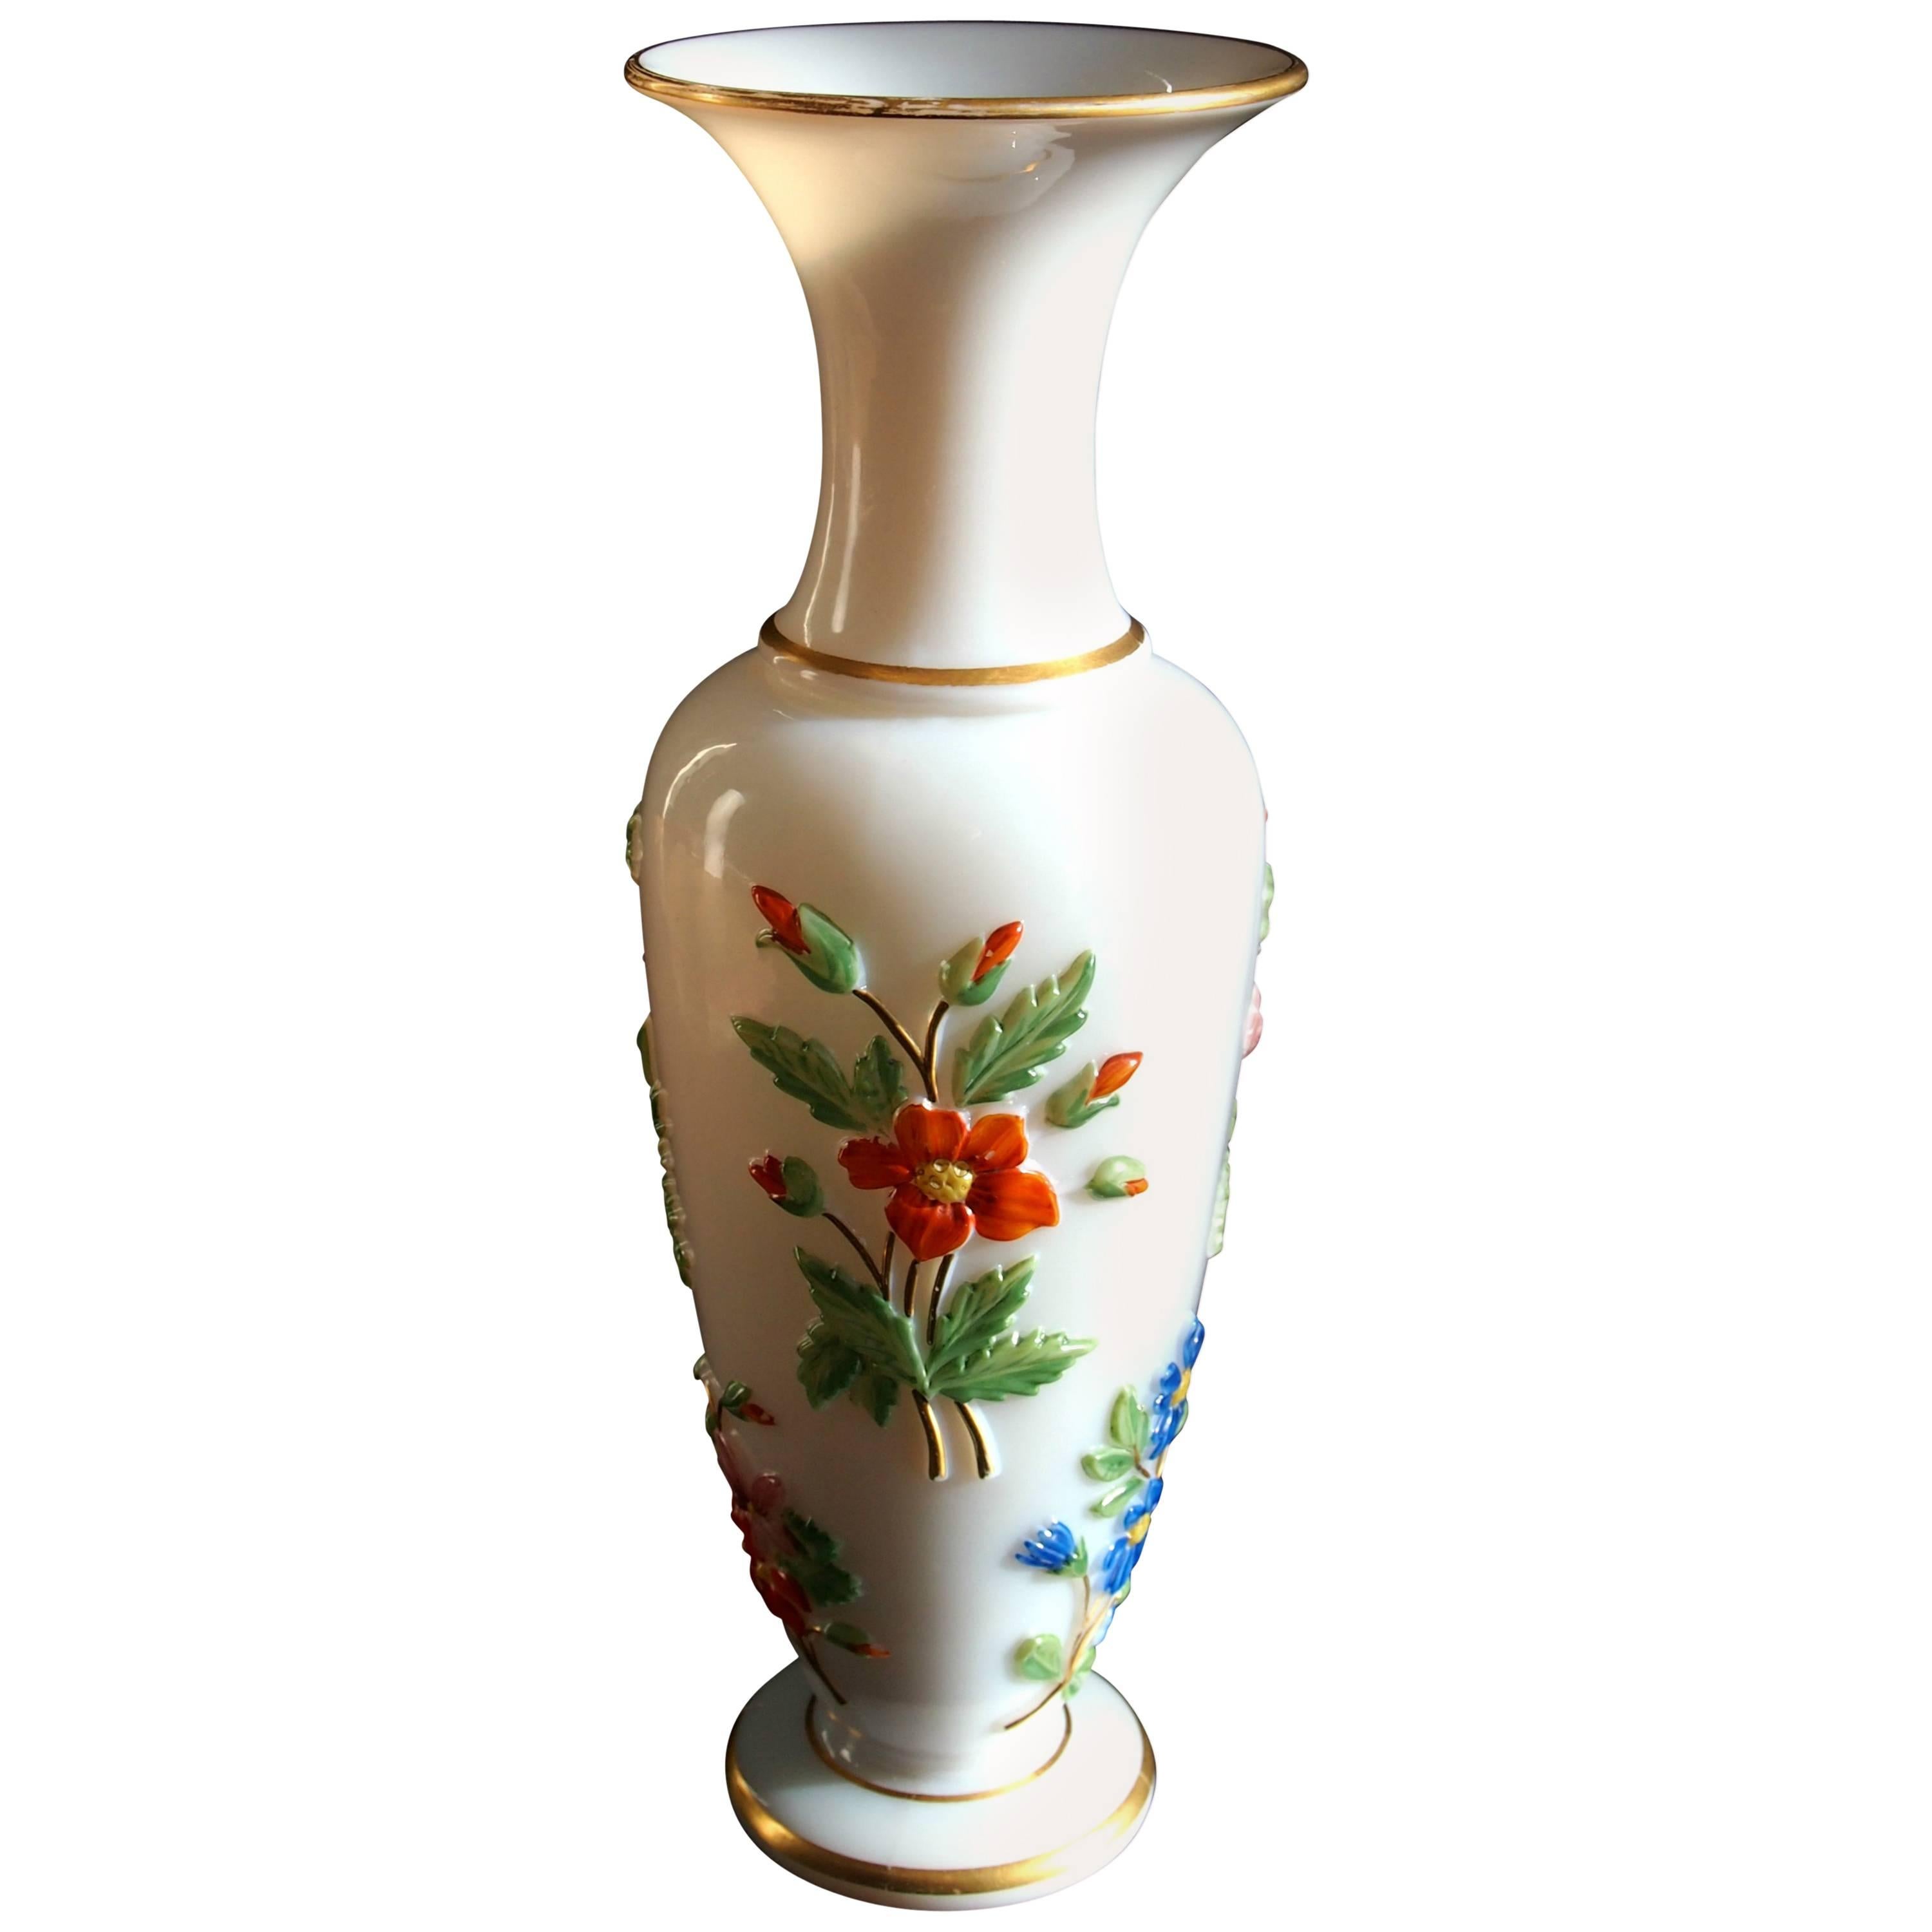 French Baccarat 19th Century Polychrome Enamel Mould Pressed Glass Crystal Vase For Sale